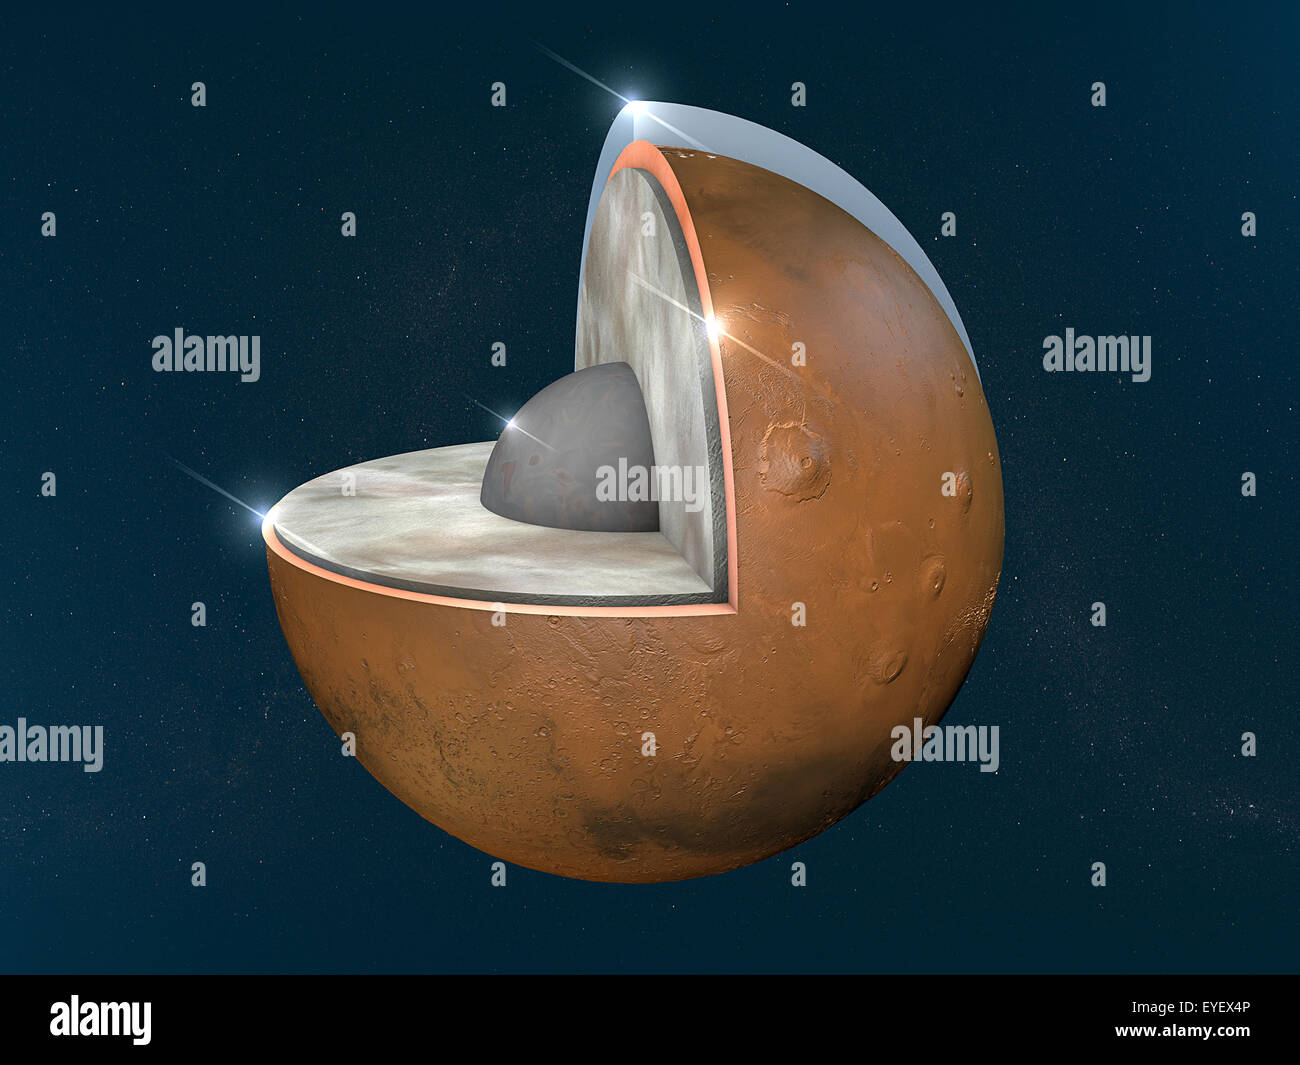 Illustration of Mars structure with layers on black background Stock Photo